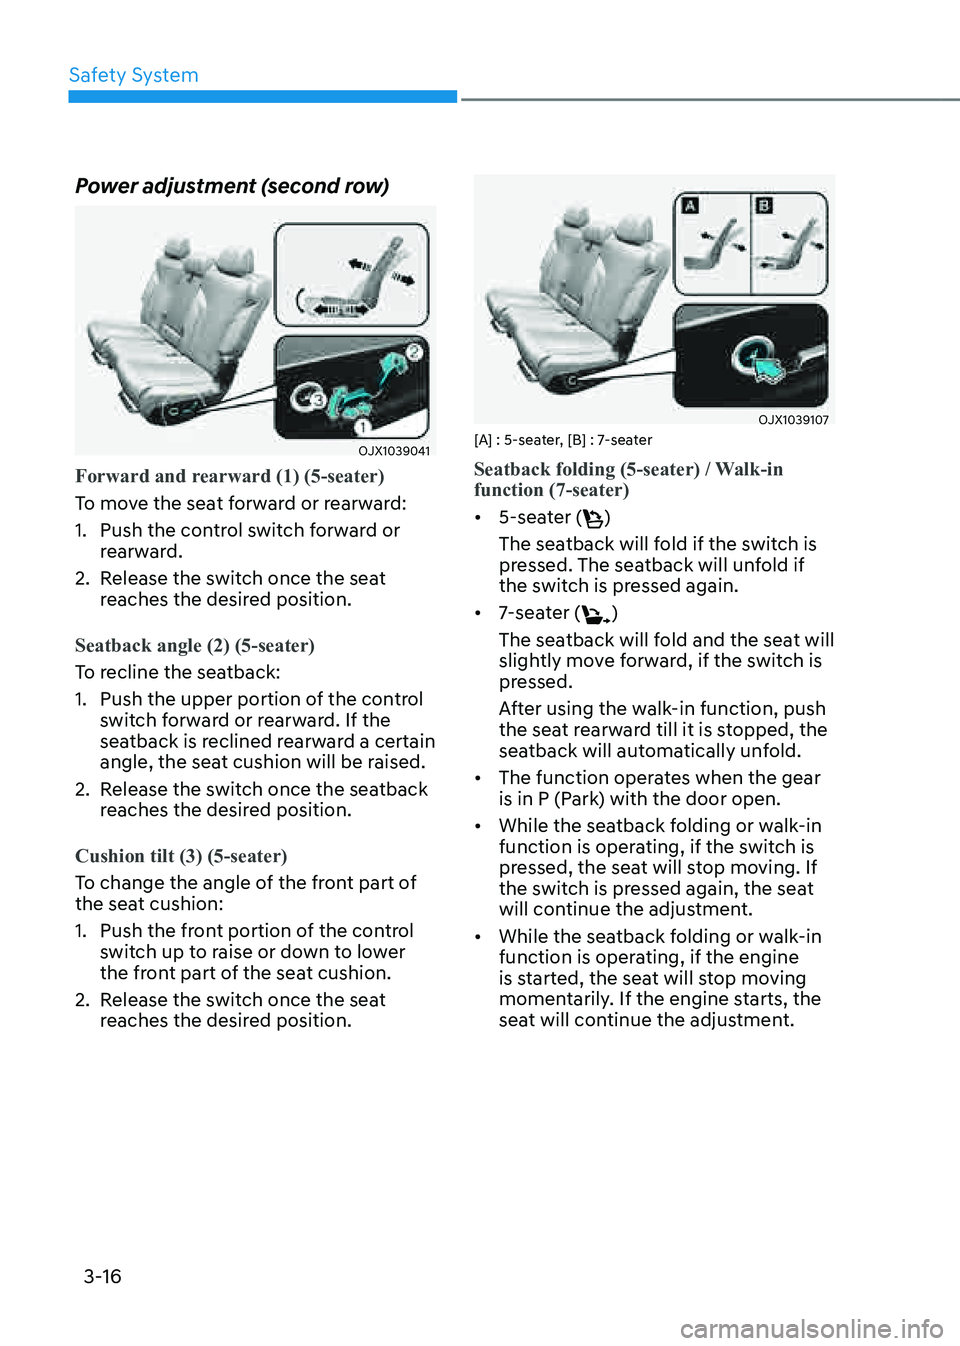 GENESIS GV80 2021  Owners Manual Safety System
3-16
Power adjustment (second row)
OJX1039041OJX1039041
Forward and rearward (1) (5-seater)
To move the seat forward or rearward:
1. Push the control switch forward or 
rearward.
2. Rele